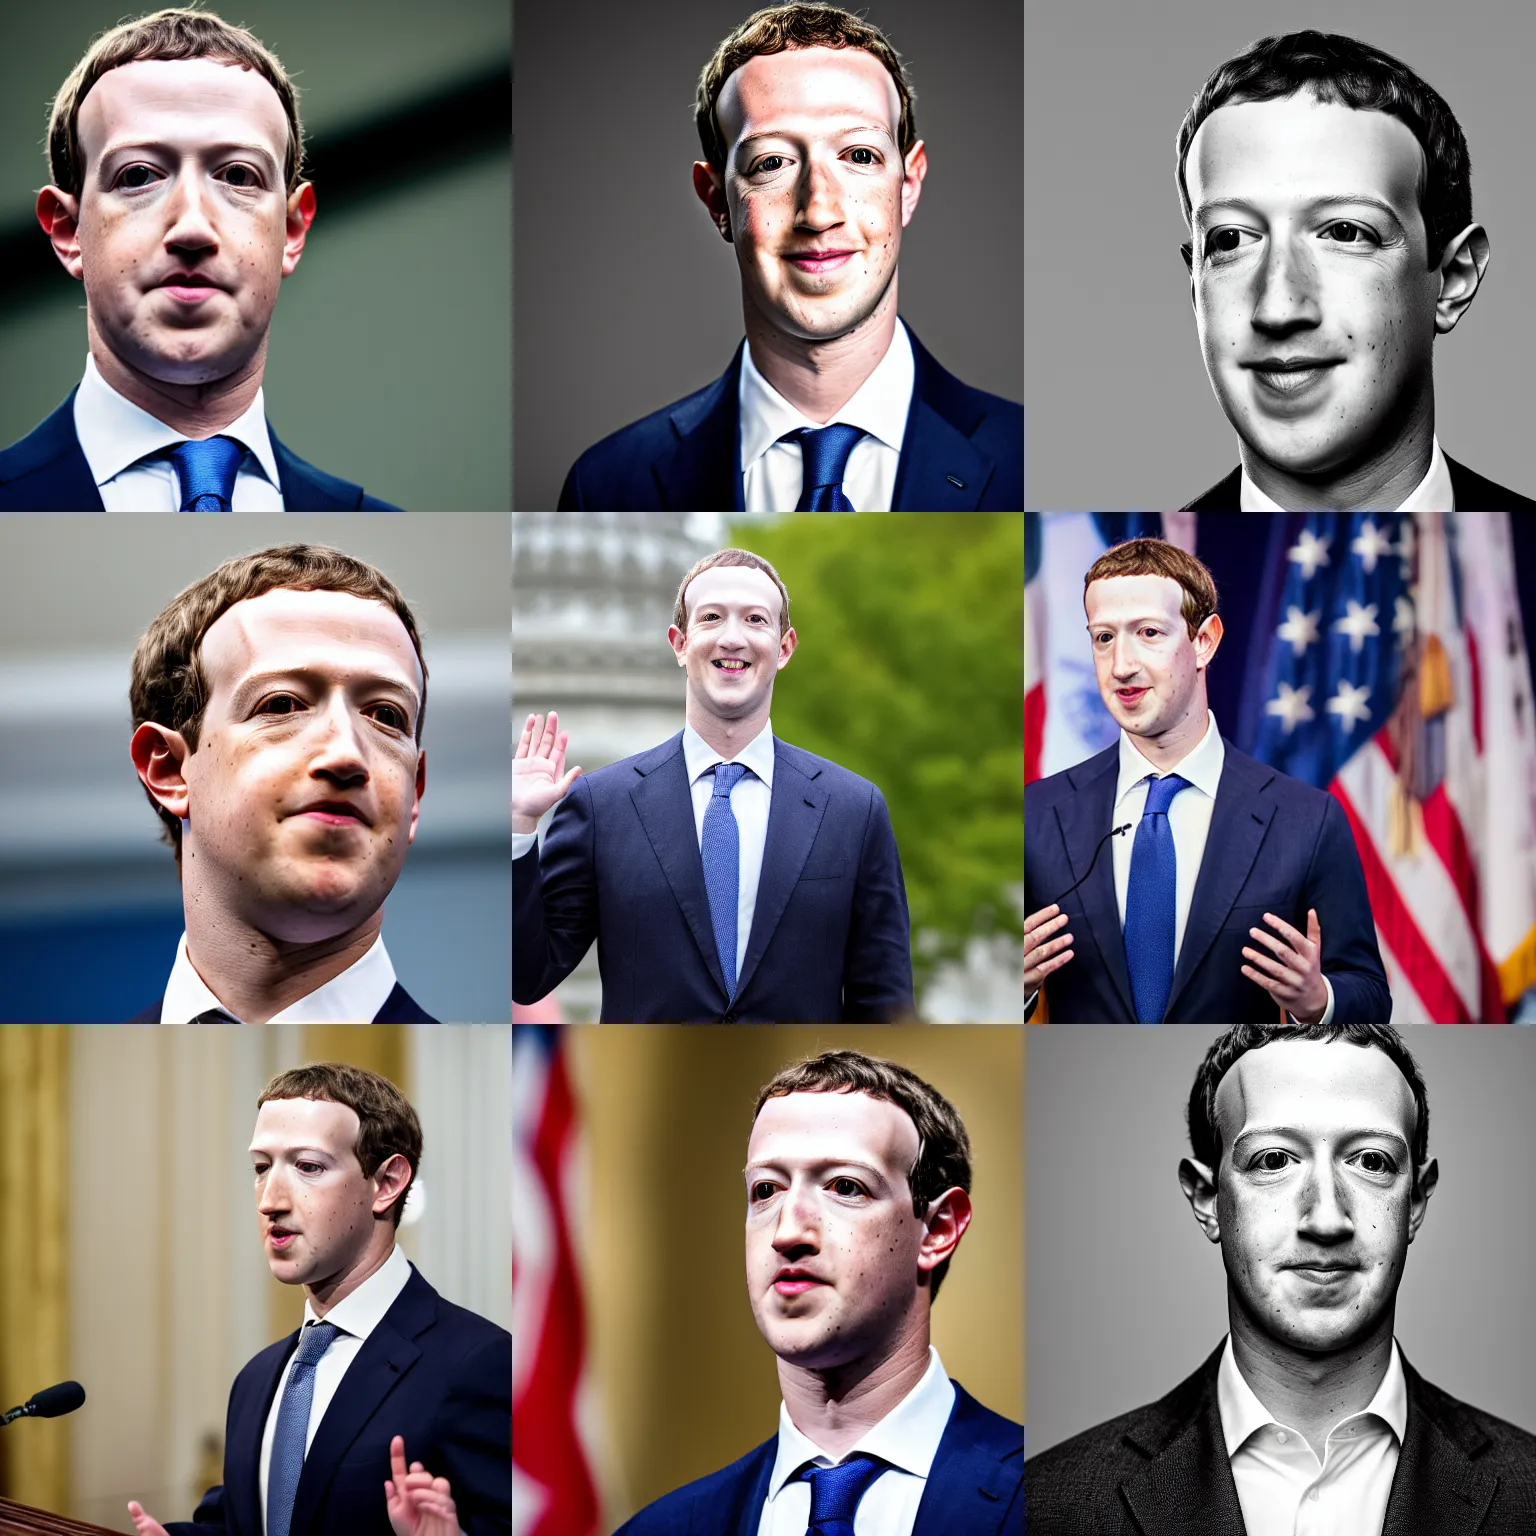 Prompt: headshot of Mark Zuckerberg as the president of the united taking the oath of office, EOS-1D, f/1.4, ISO 200, 1/160s, 8K, RAW, unedited, symmetrical balance, in-frame, Photoshop, Nvidia, Topaz AI